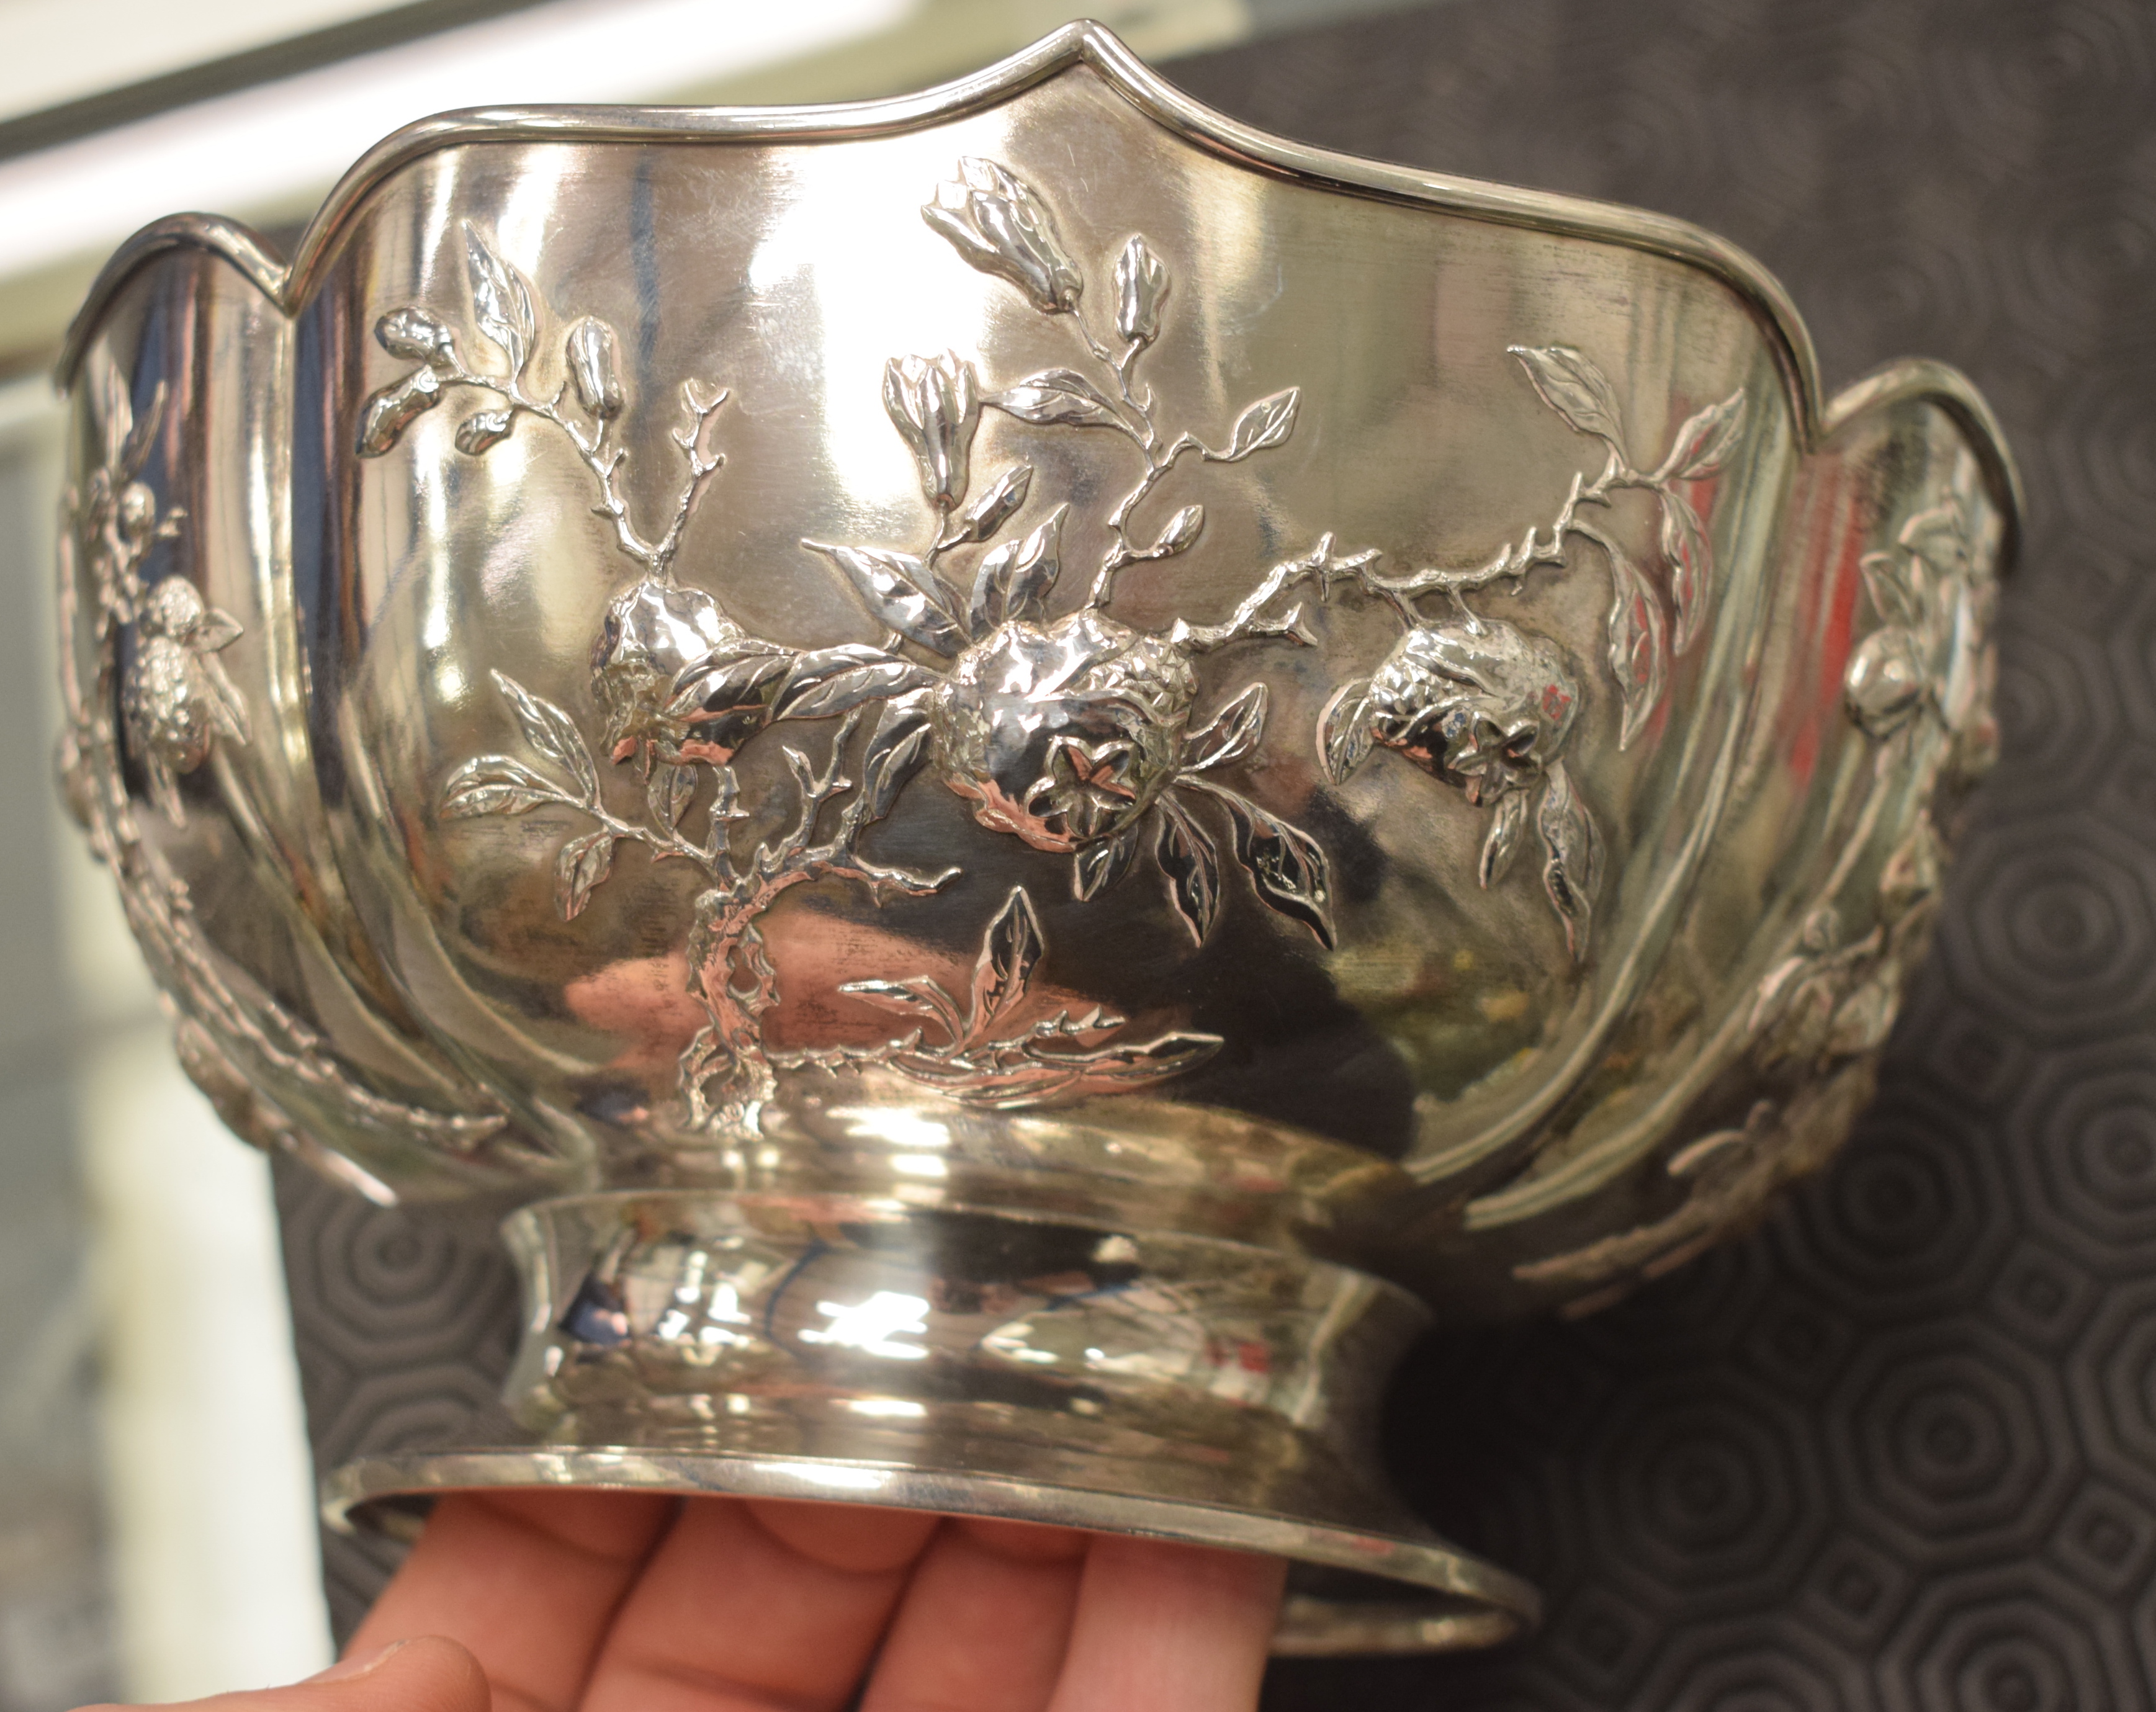 A LATE 19TH CENTURY CHINESE SCALLOPED SILVER BOWL by Zeewo, decorated with foliage and vines. 558 gr - Image 6 of 9